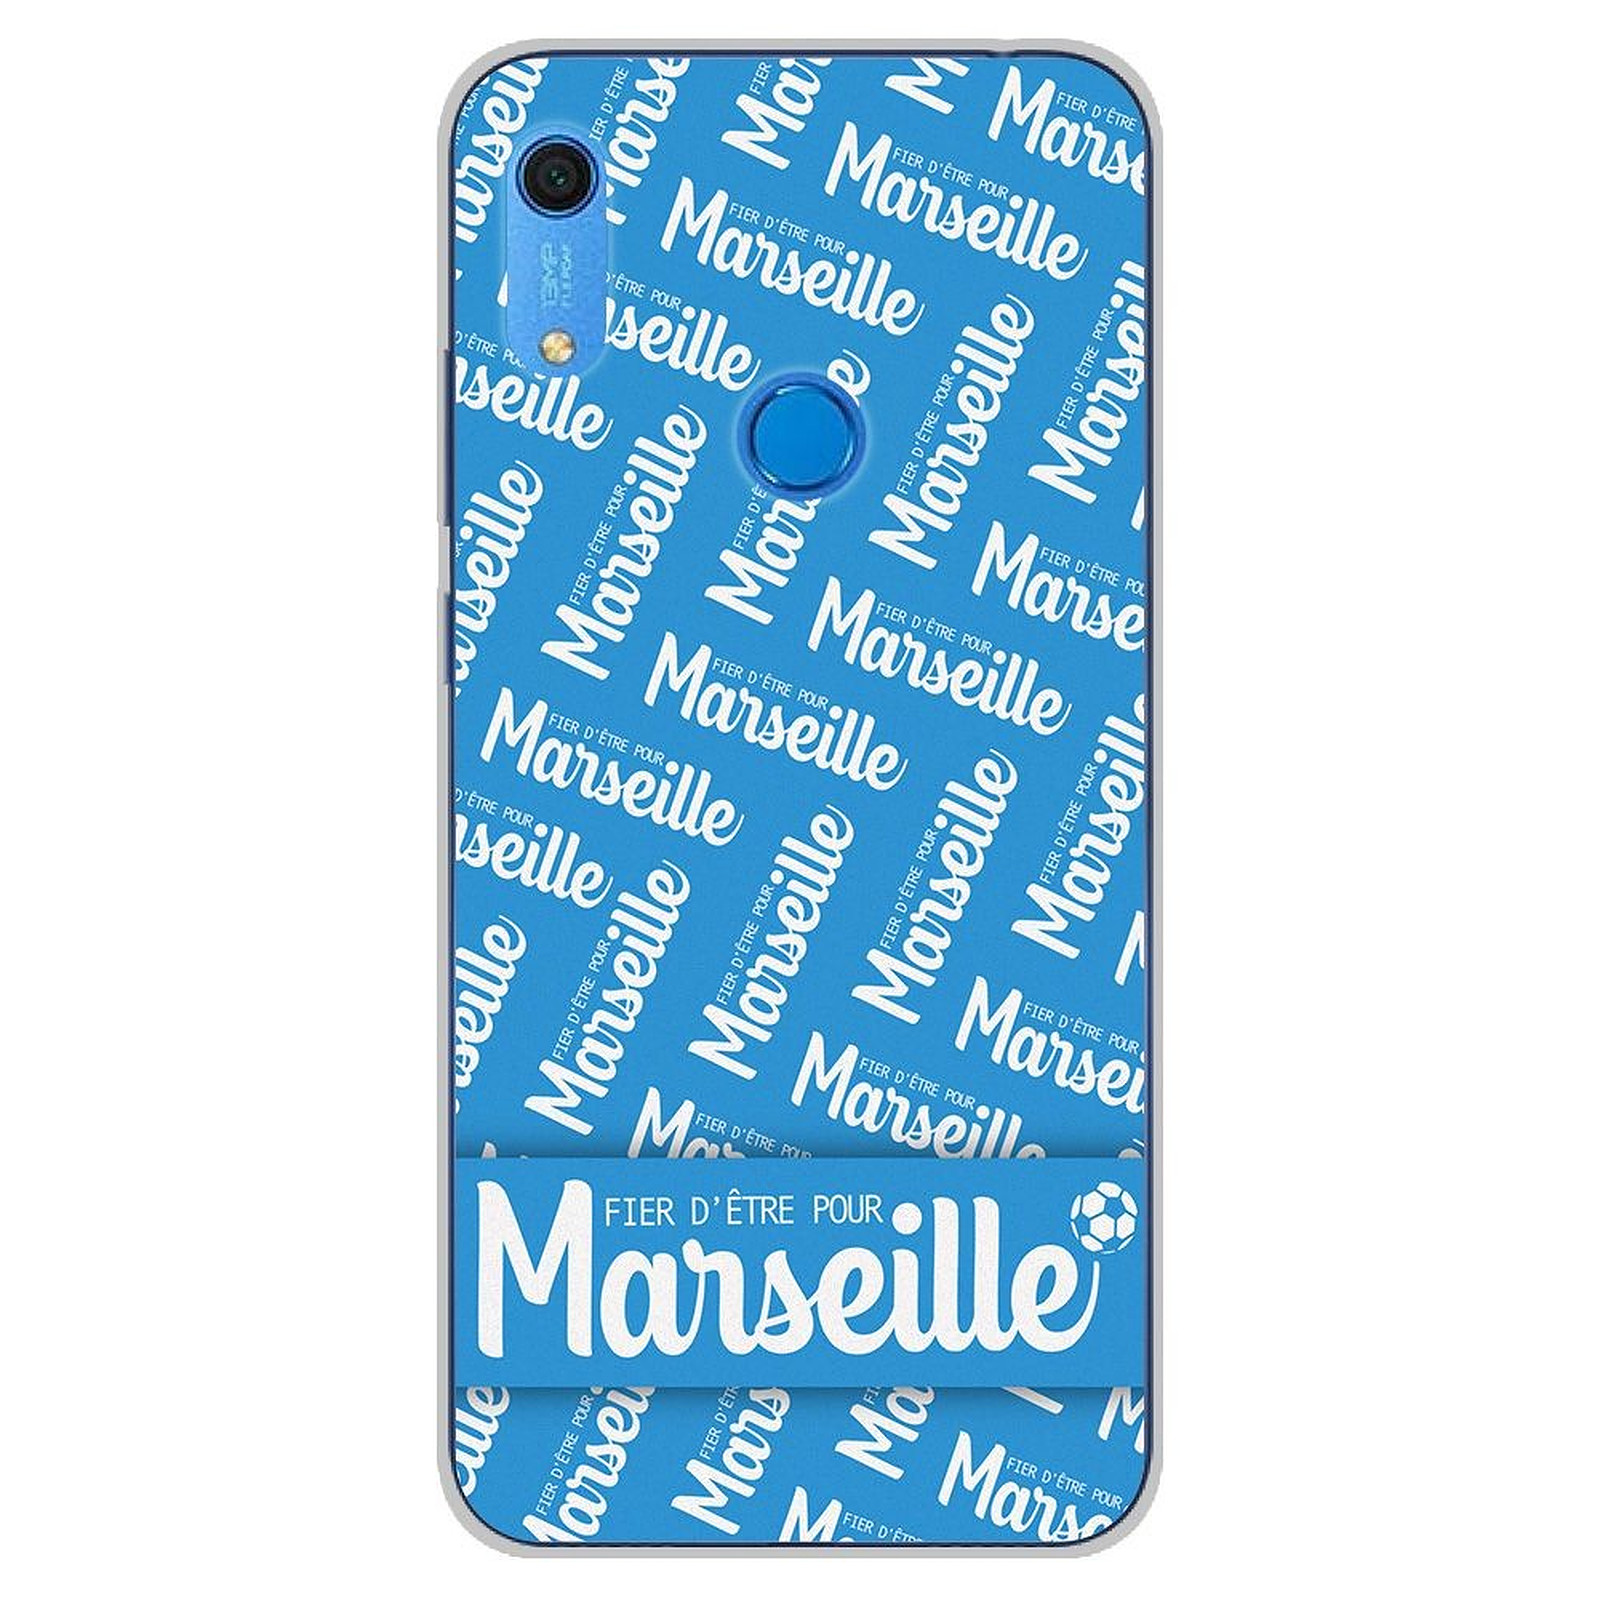 1001 Coques Coque silicone gel Huawei Y6S motif Fier d'etre pour Marseille - Coque telephone 1001Coques